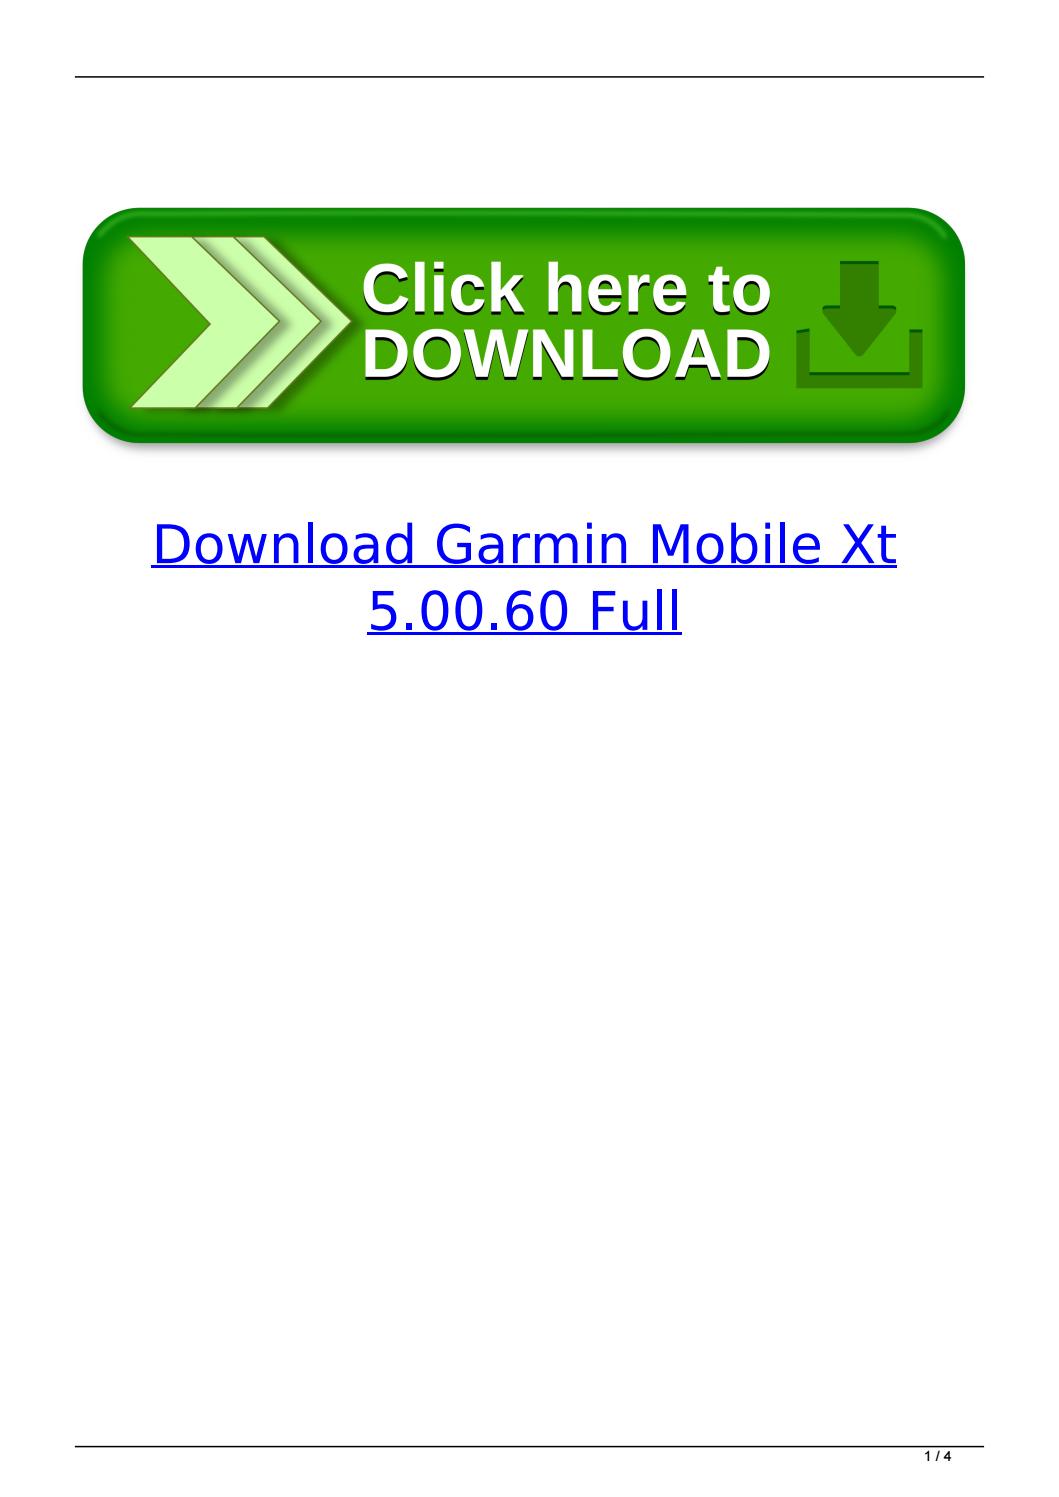 Garmin Mobile Xt For Android Free Download